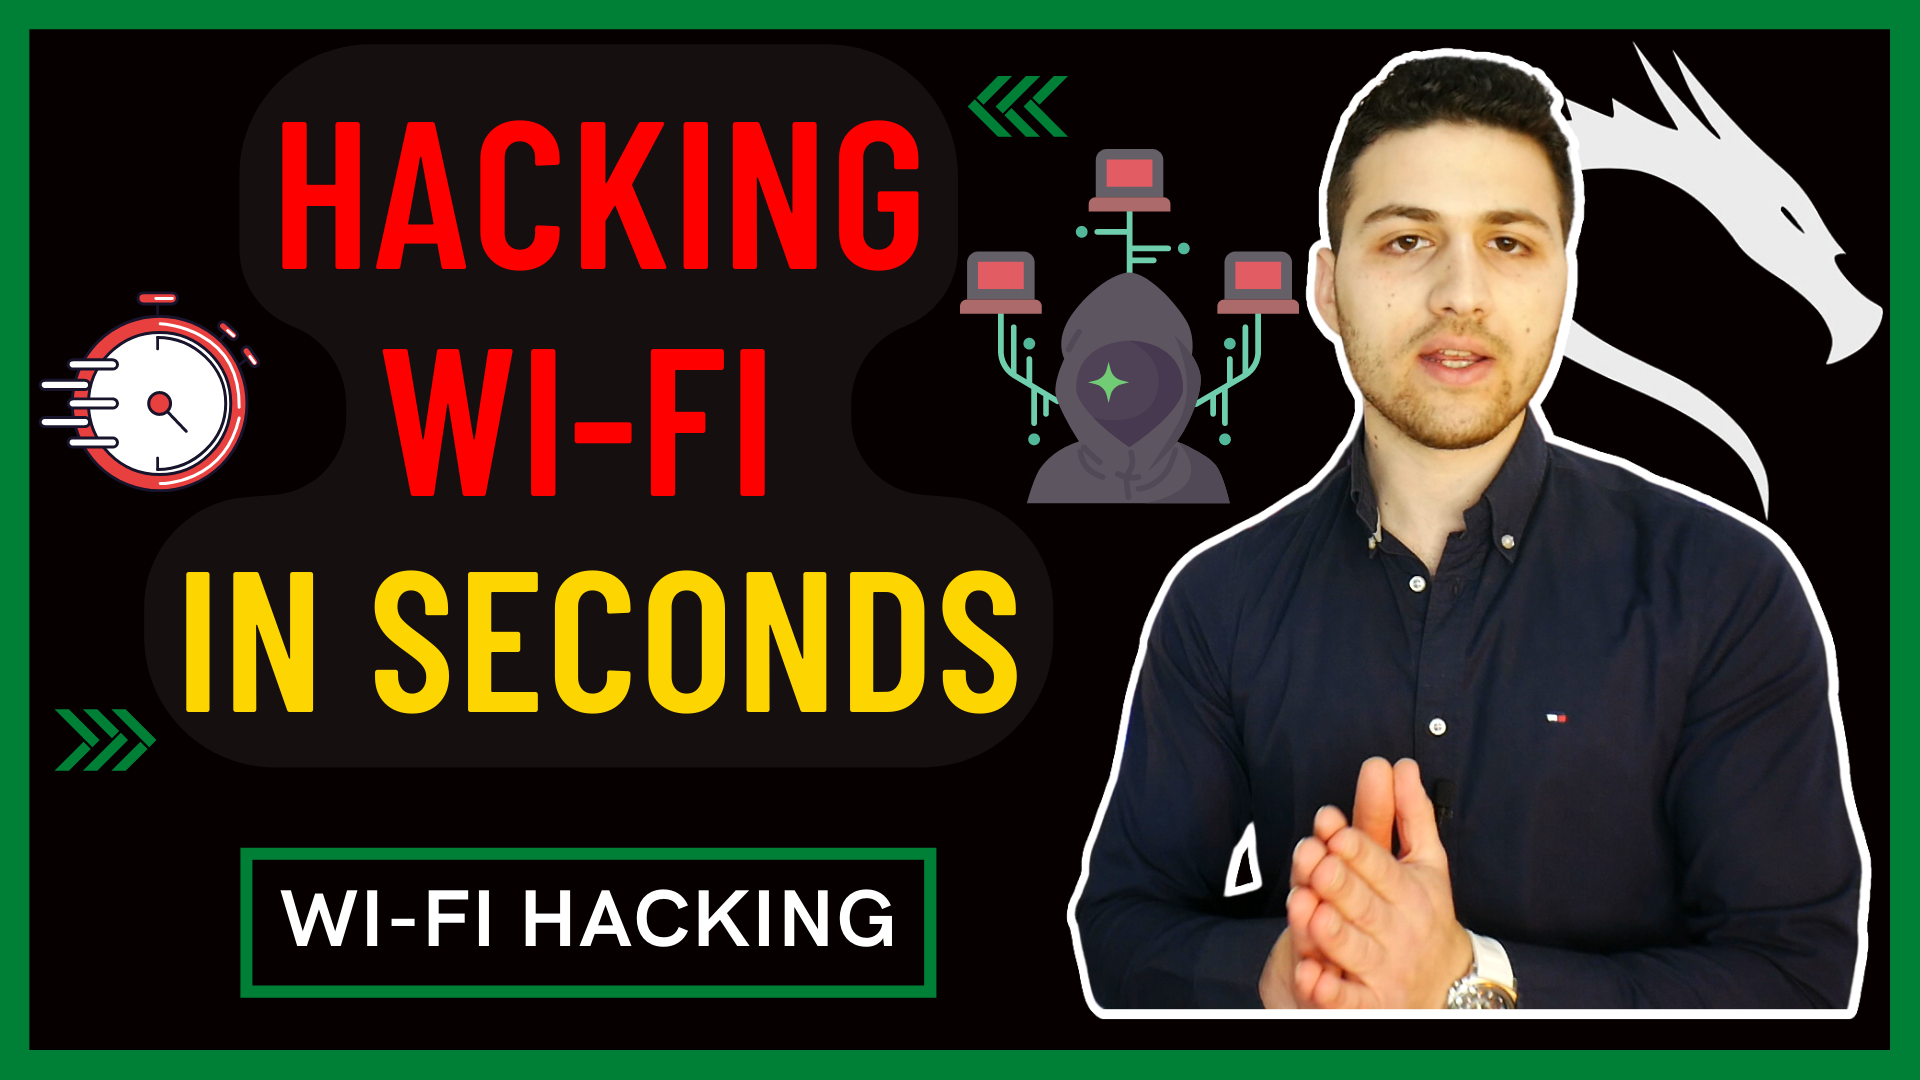 Hacking WiFi in Seconds using Rainbow Table